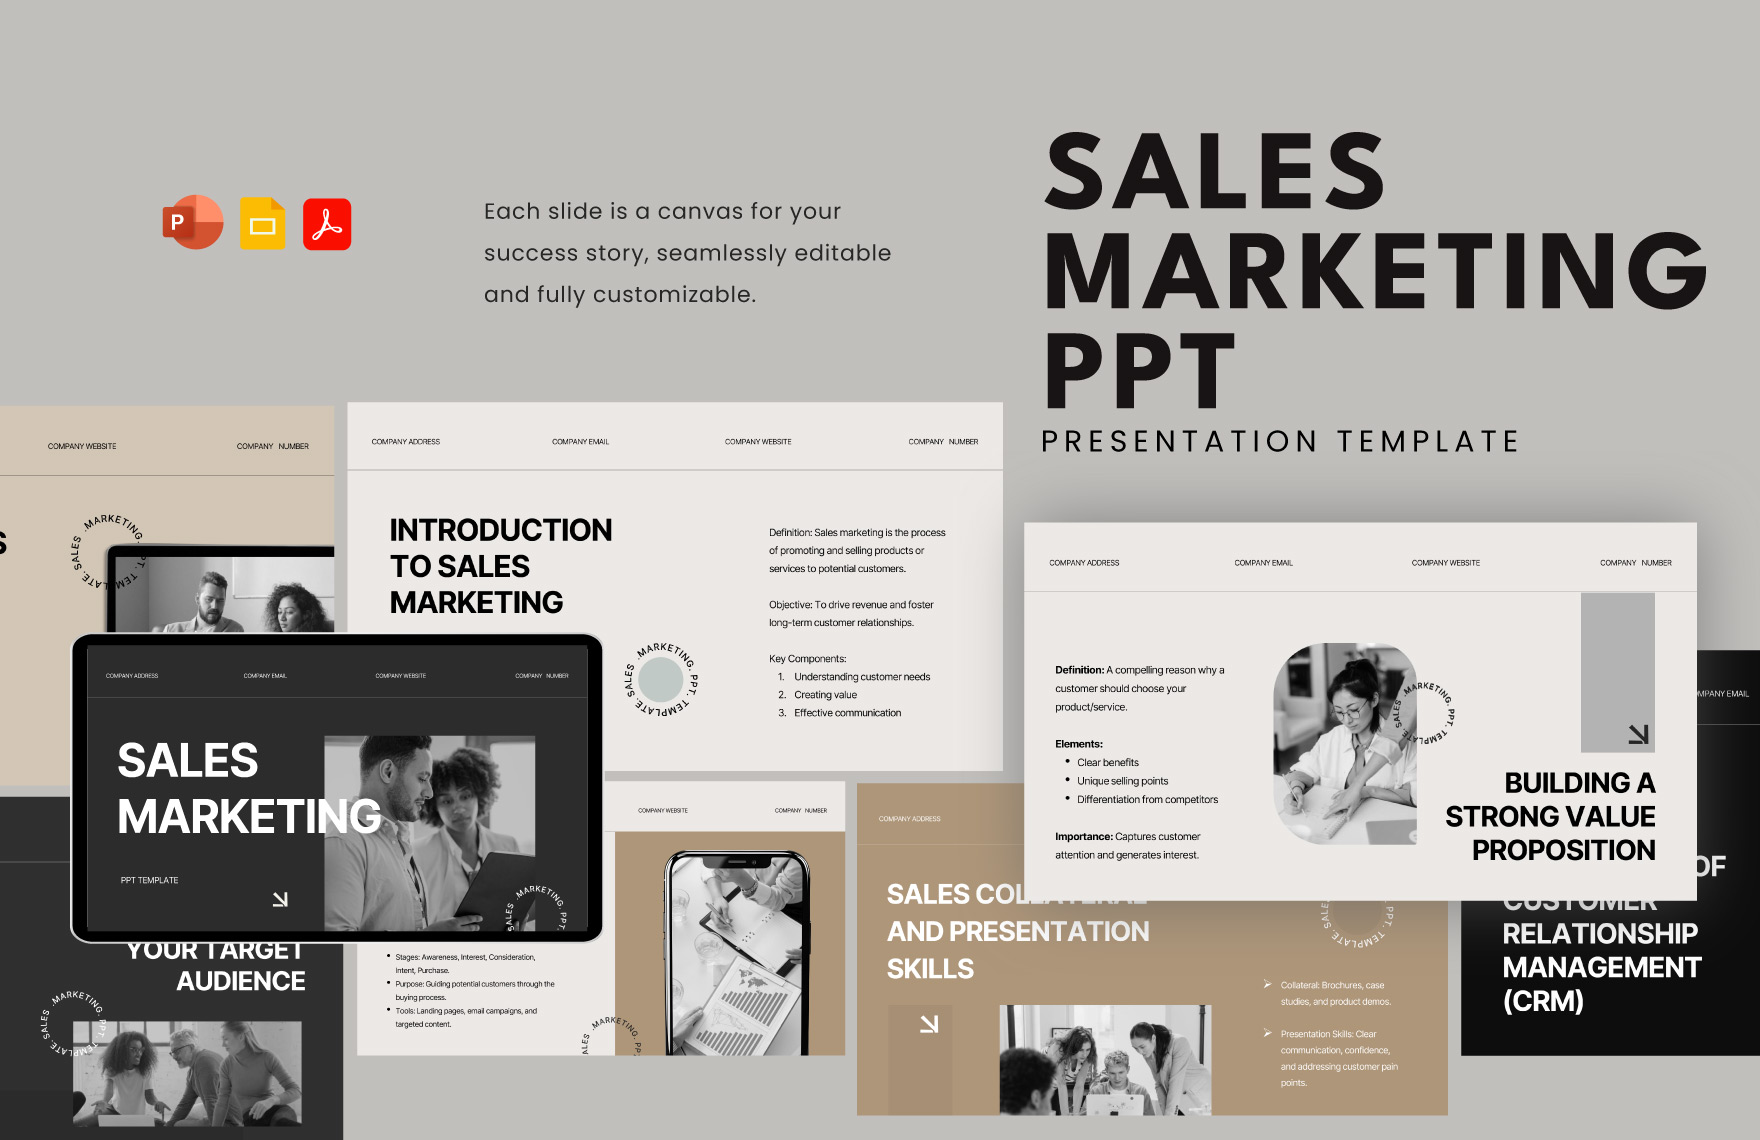 Sales Marketing PPT Template